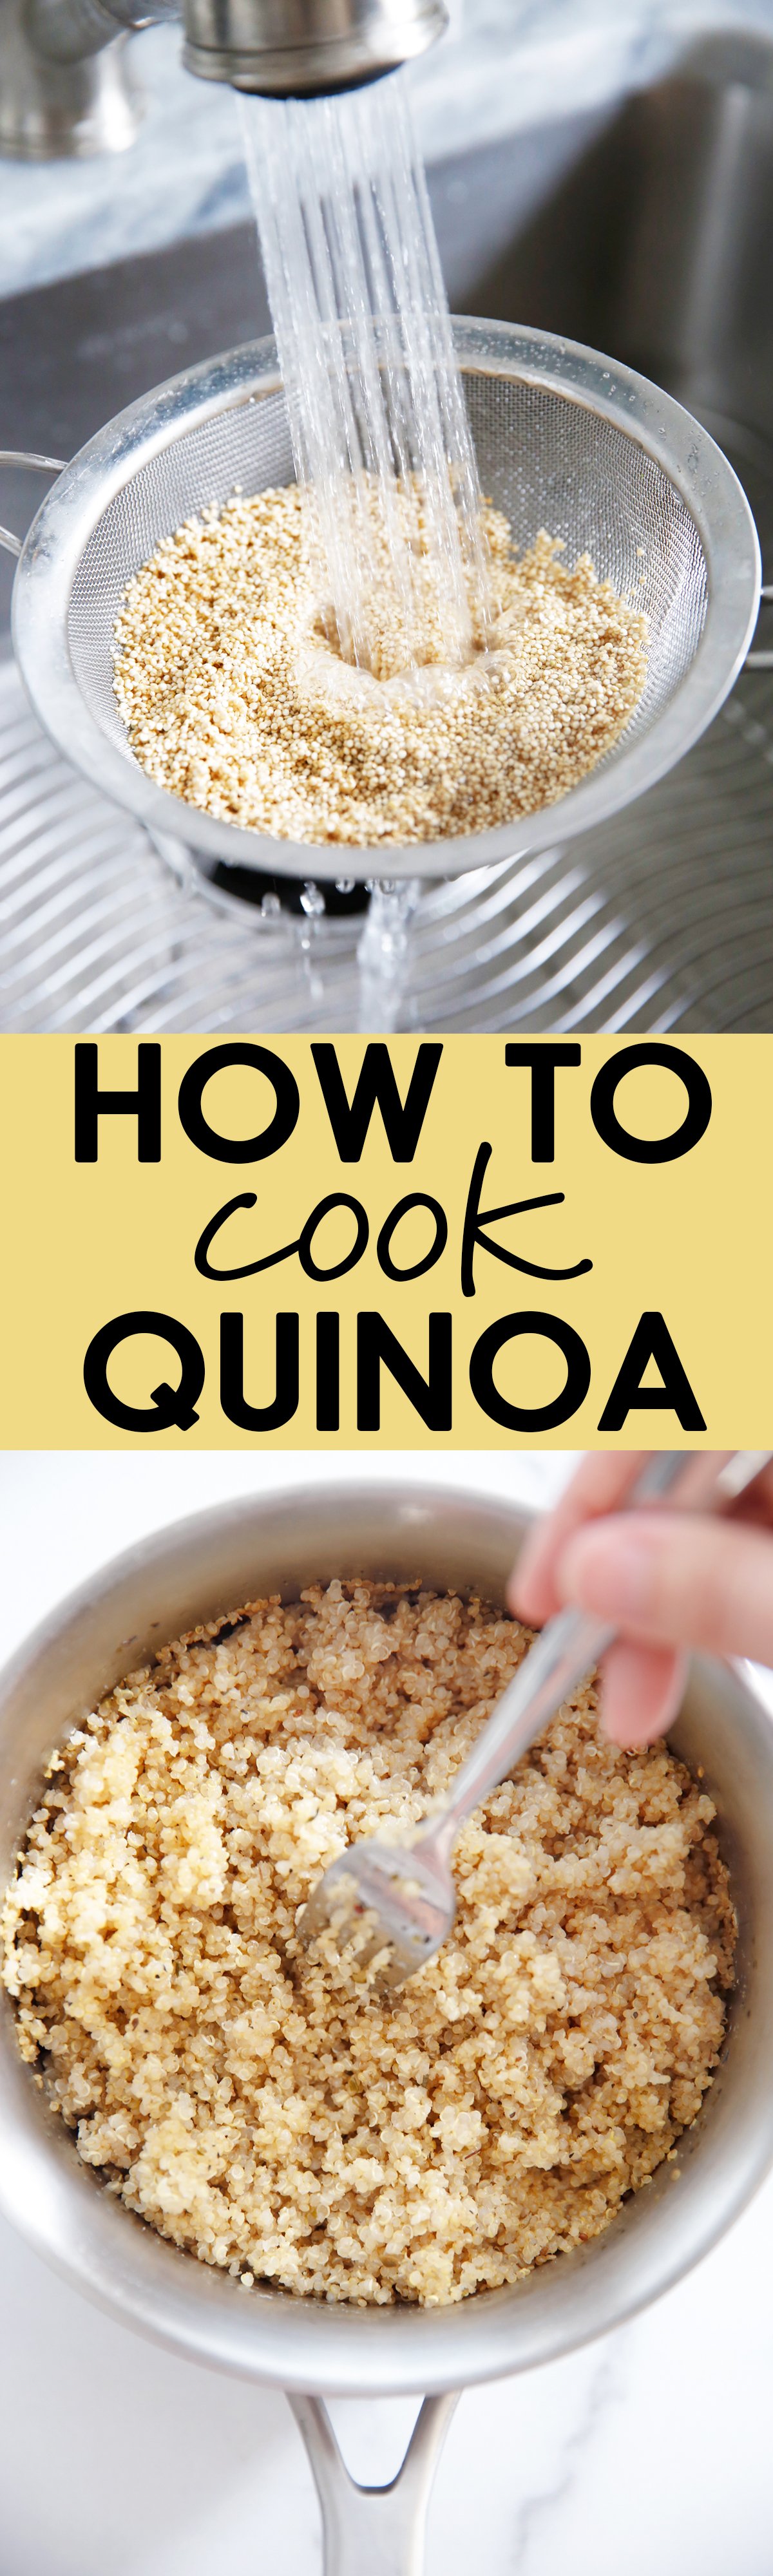 How to Cook Quinoa | Lexi's Clean Kitchen